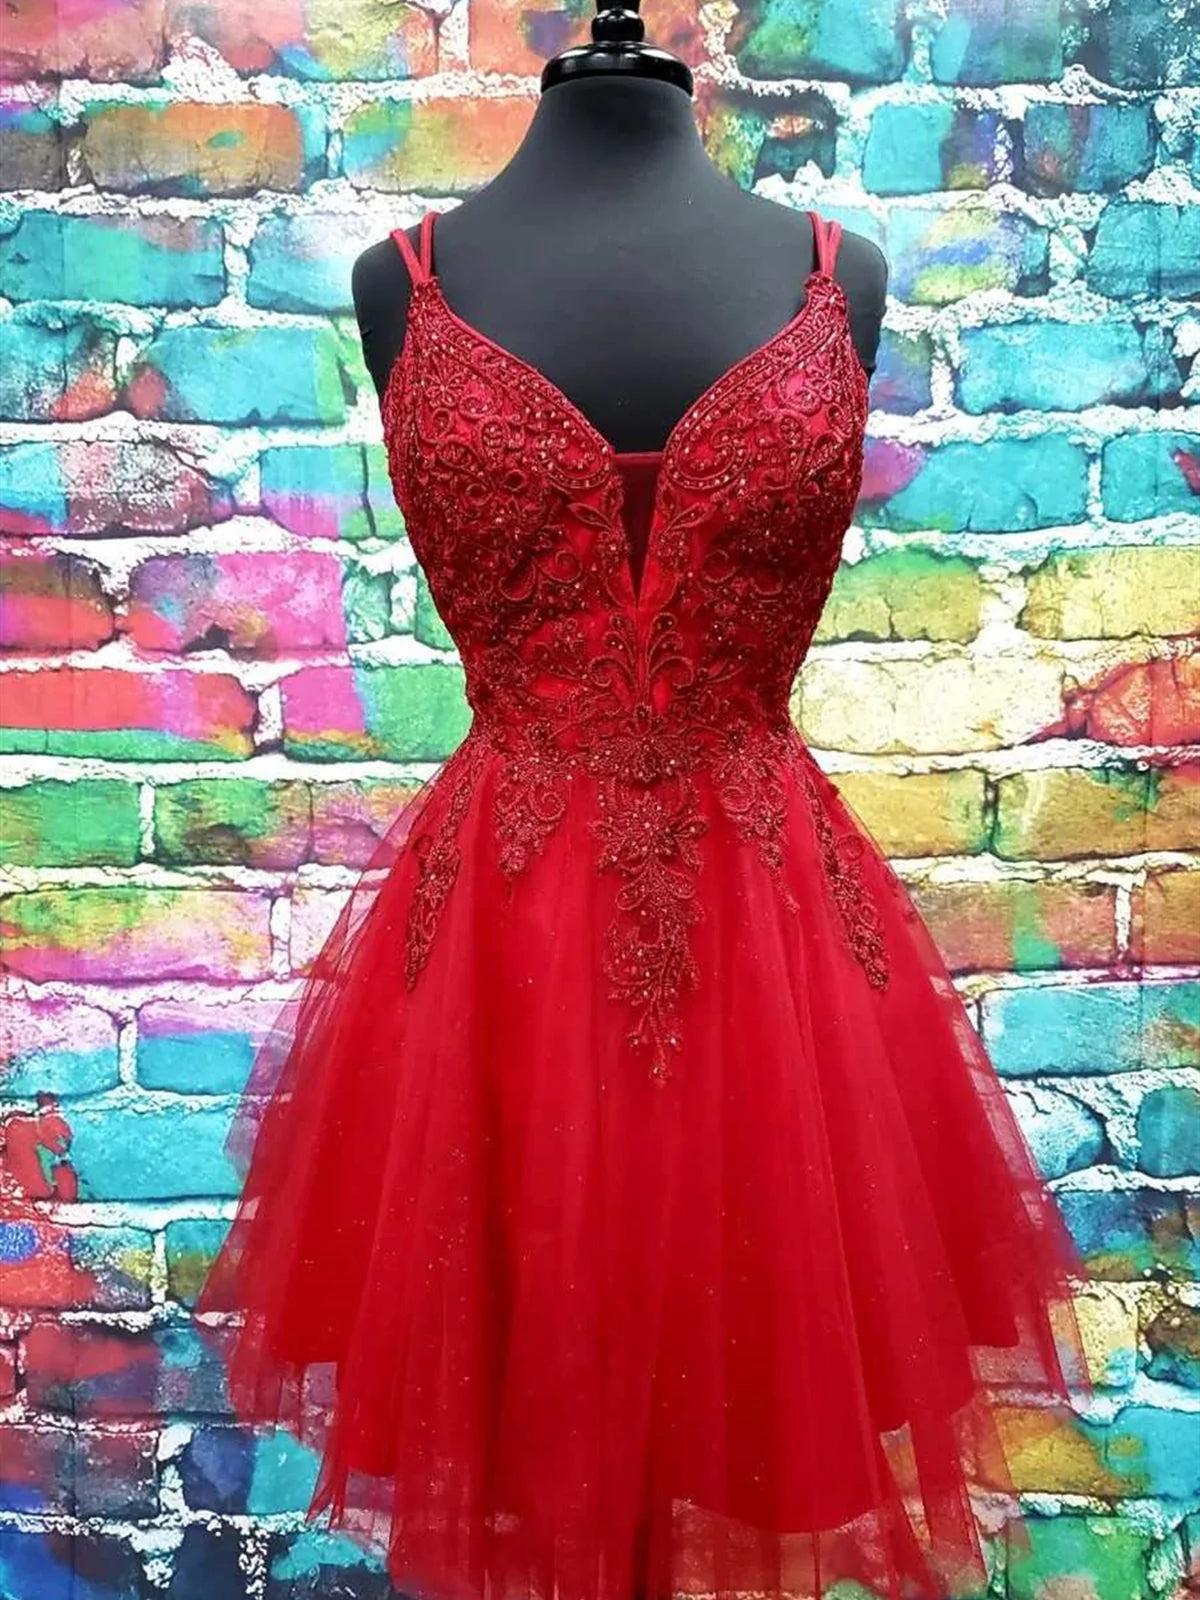 A Line V Neck Dark Red Lace Corset Prom Dresses, Dark Red Lace Corset Formal Corset Homecoming Dresses outfit, Party Dress Roman